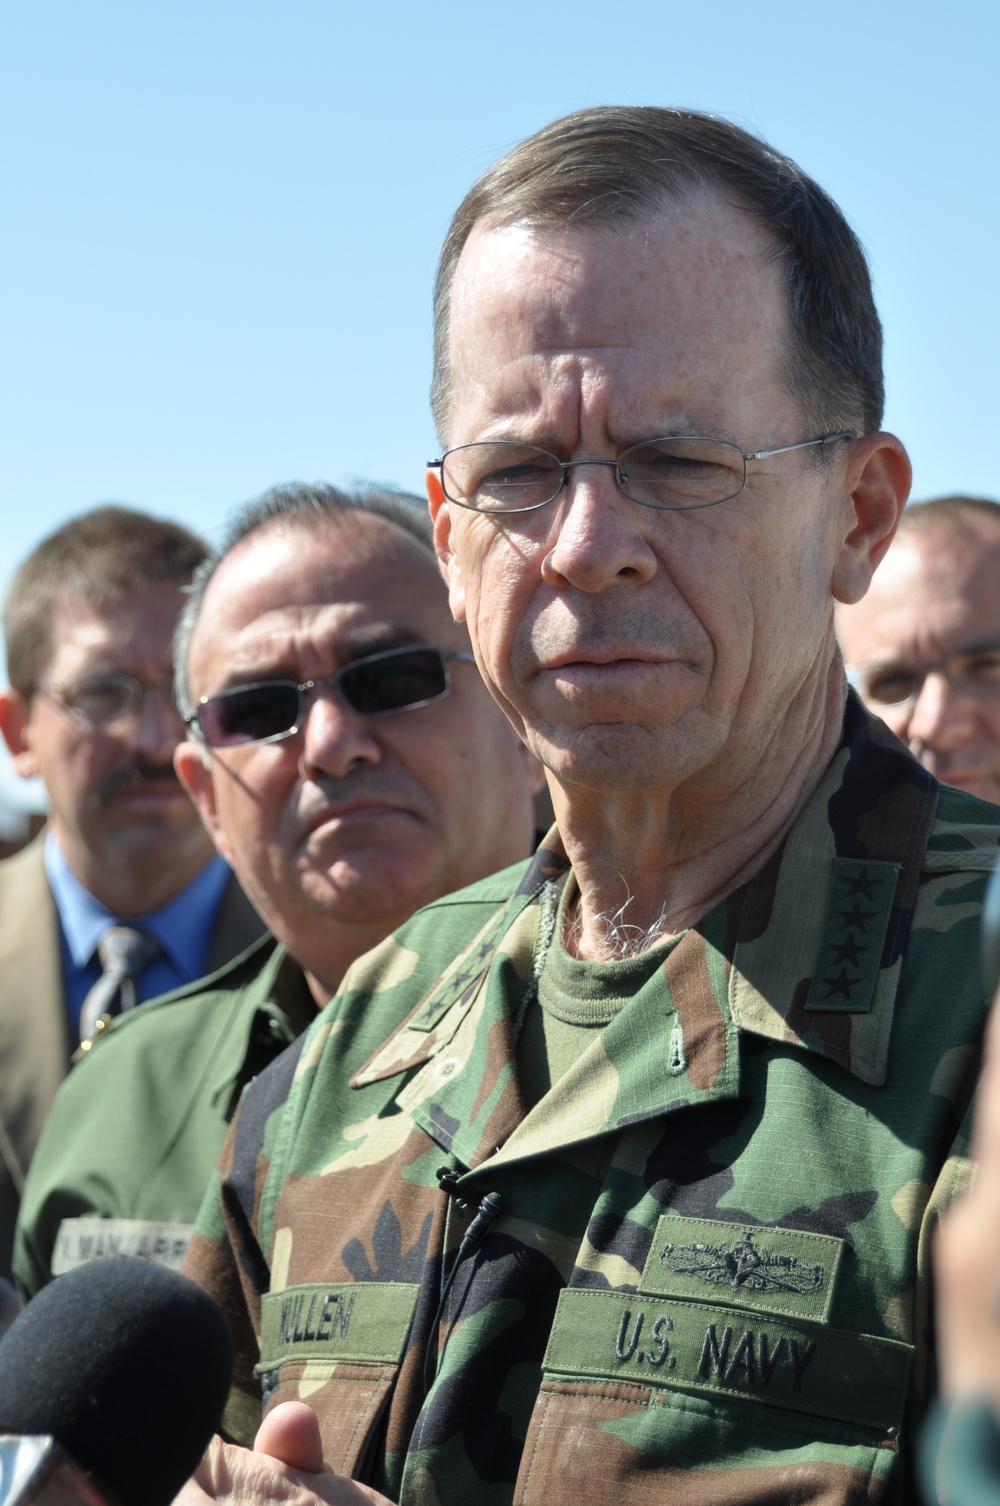 Chairman Visits Bliss; Mullen Meets With MacFarland to Discuss Interagency Needs